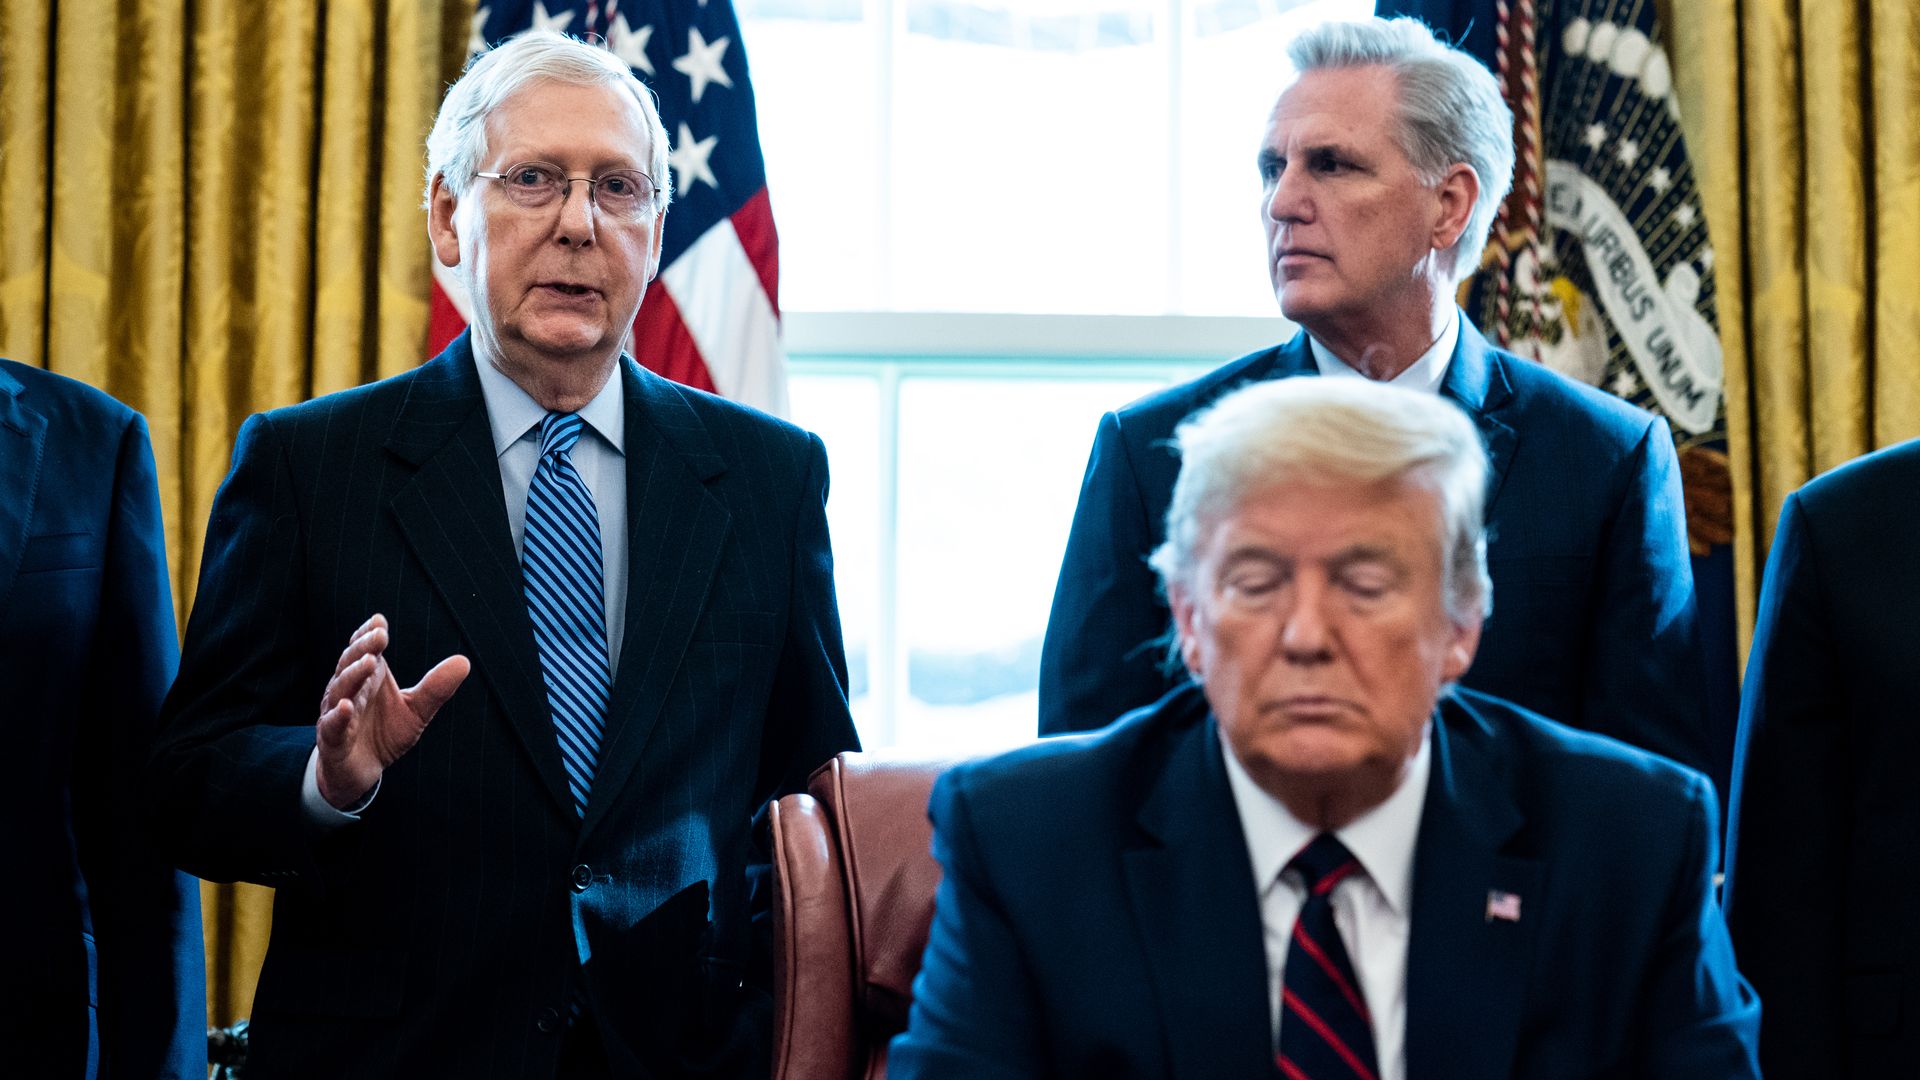 Sen. Mitch McConnell in the Oval Office with President Trump